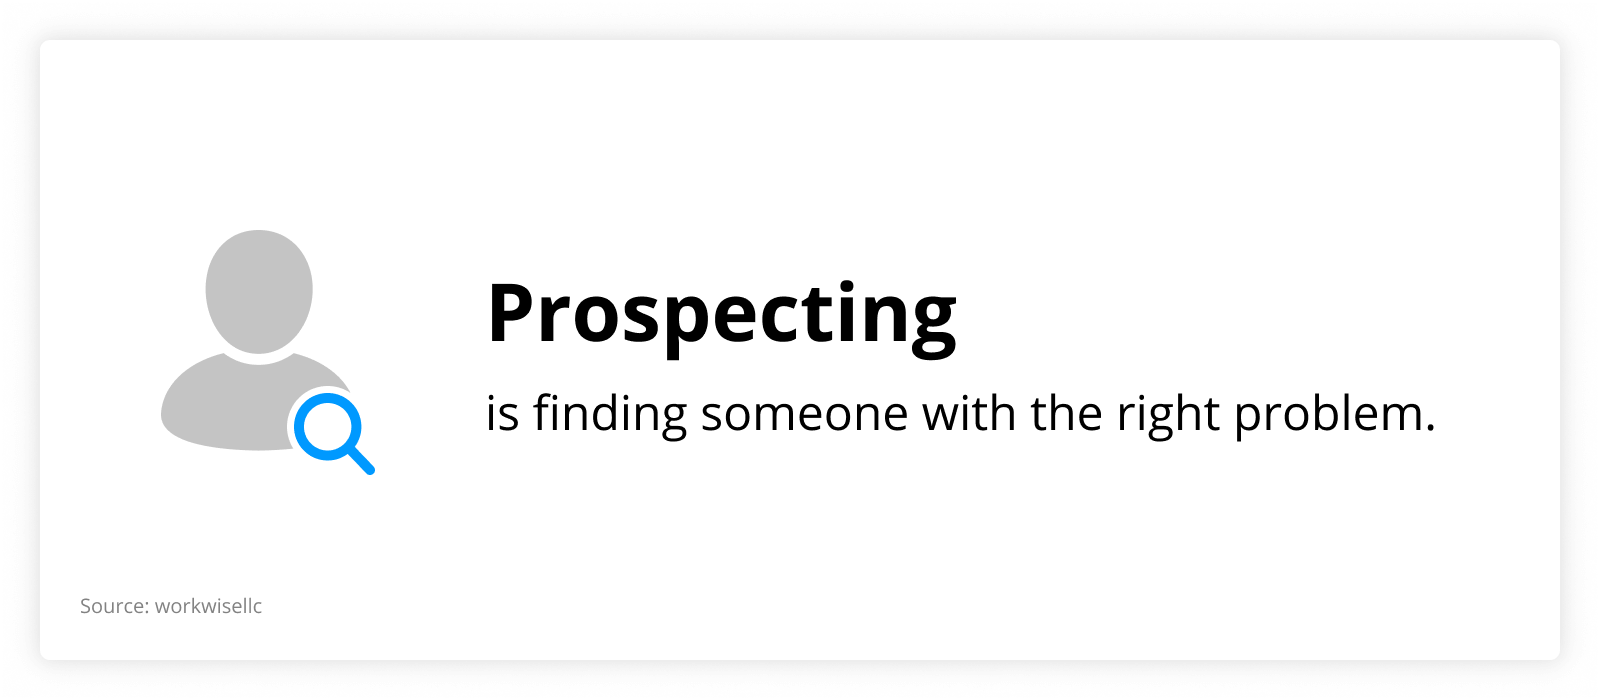 graph showing that prospecting is finding someone with the right problem